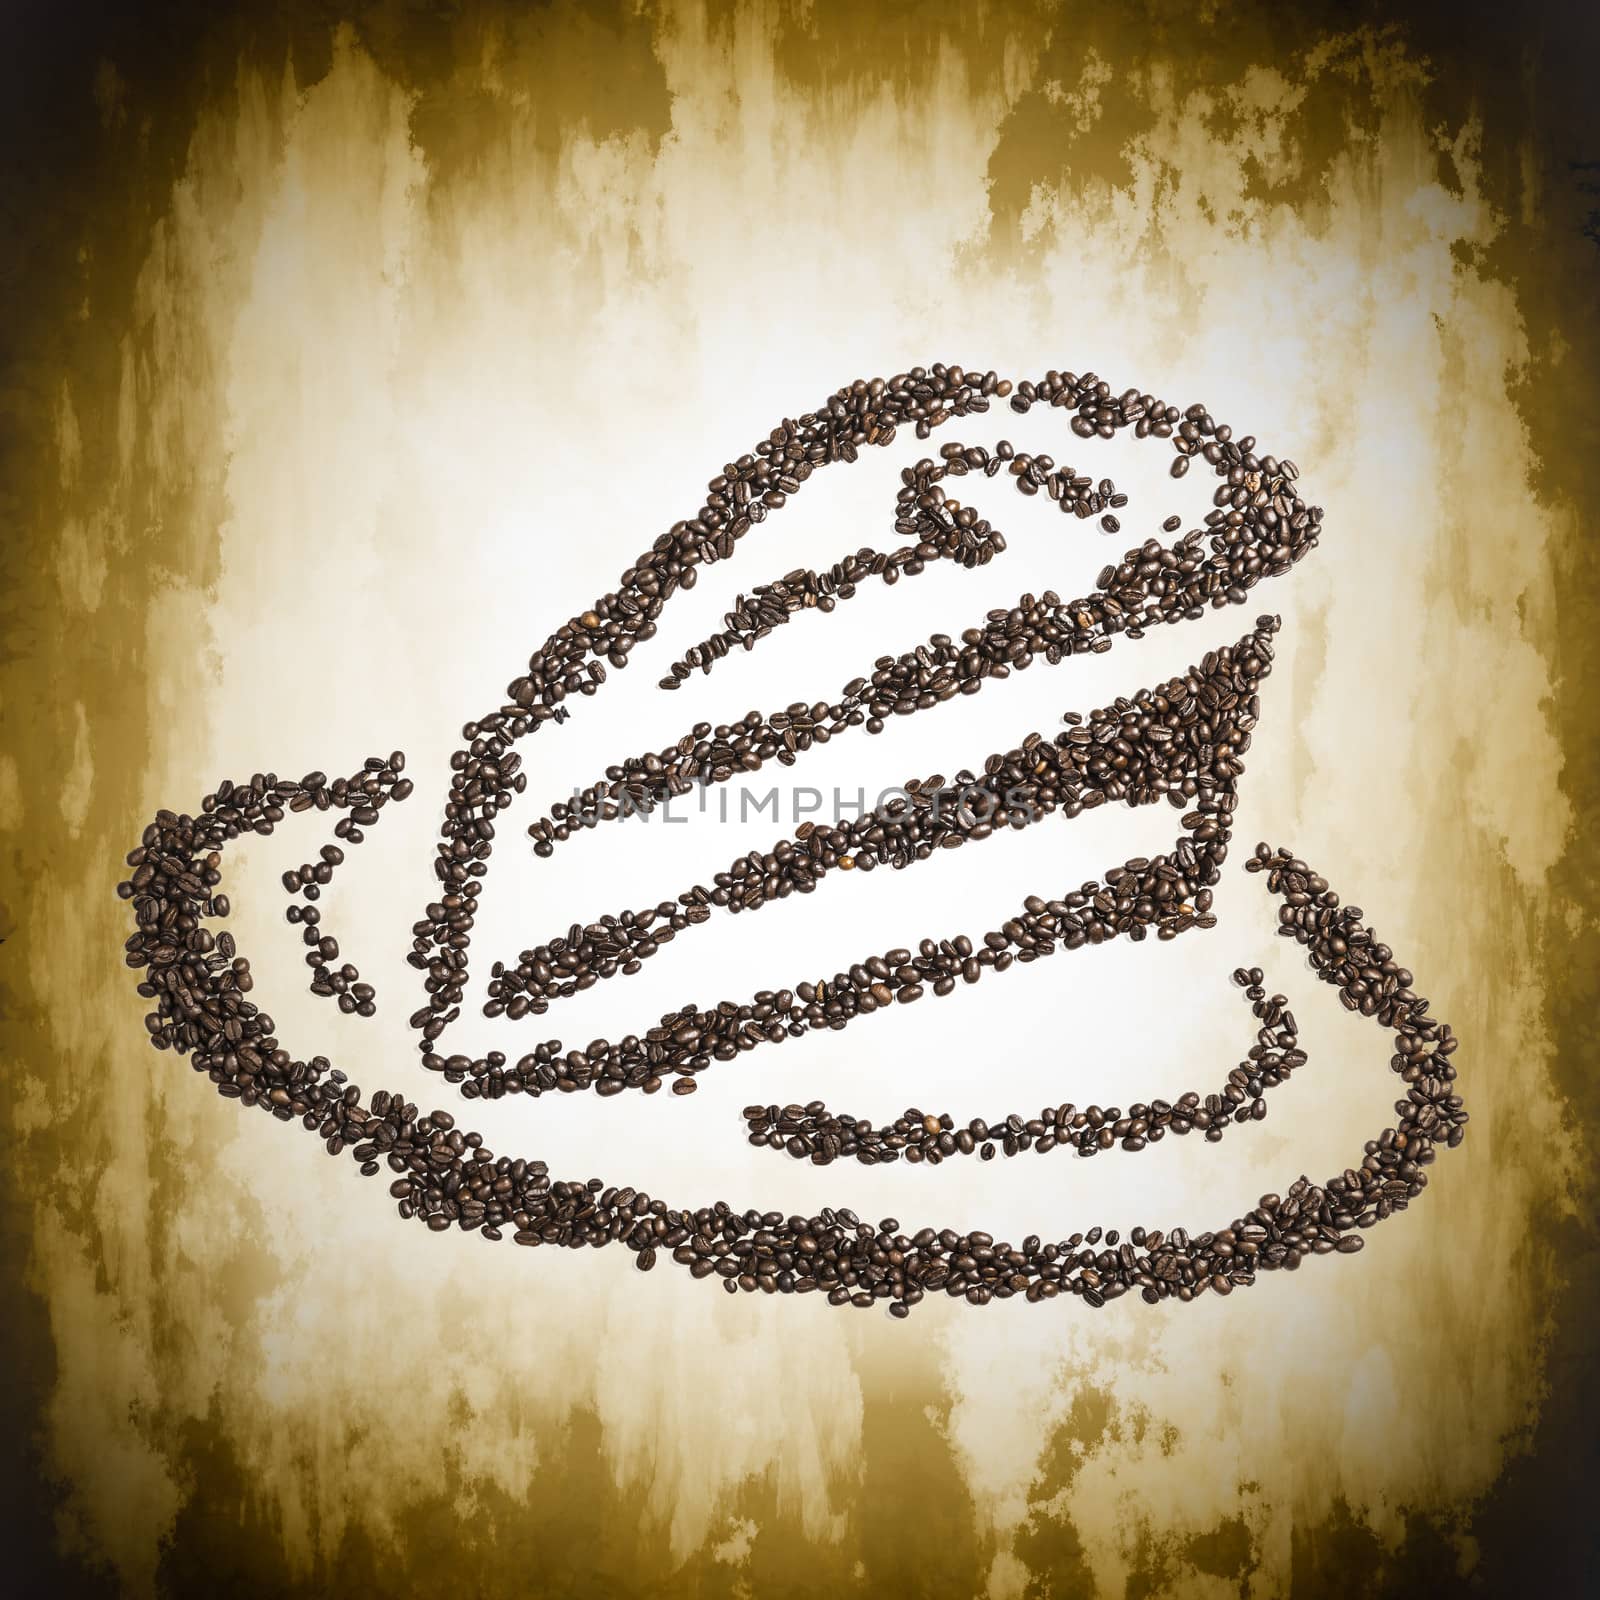 Image of a cake made from coffee beans 